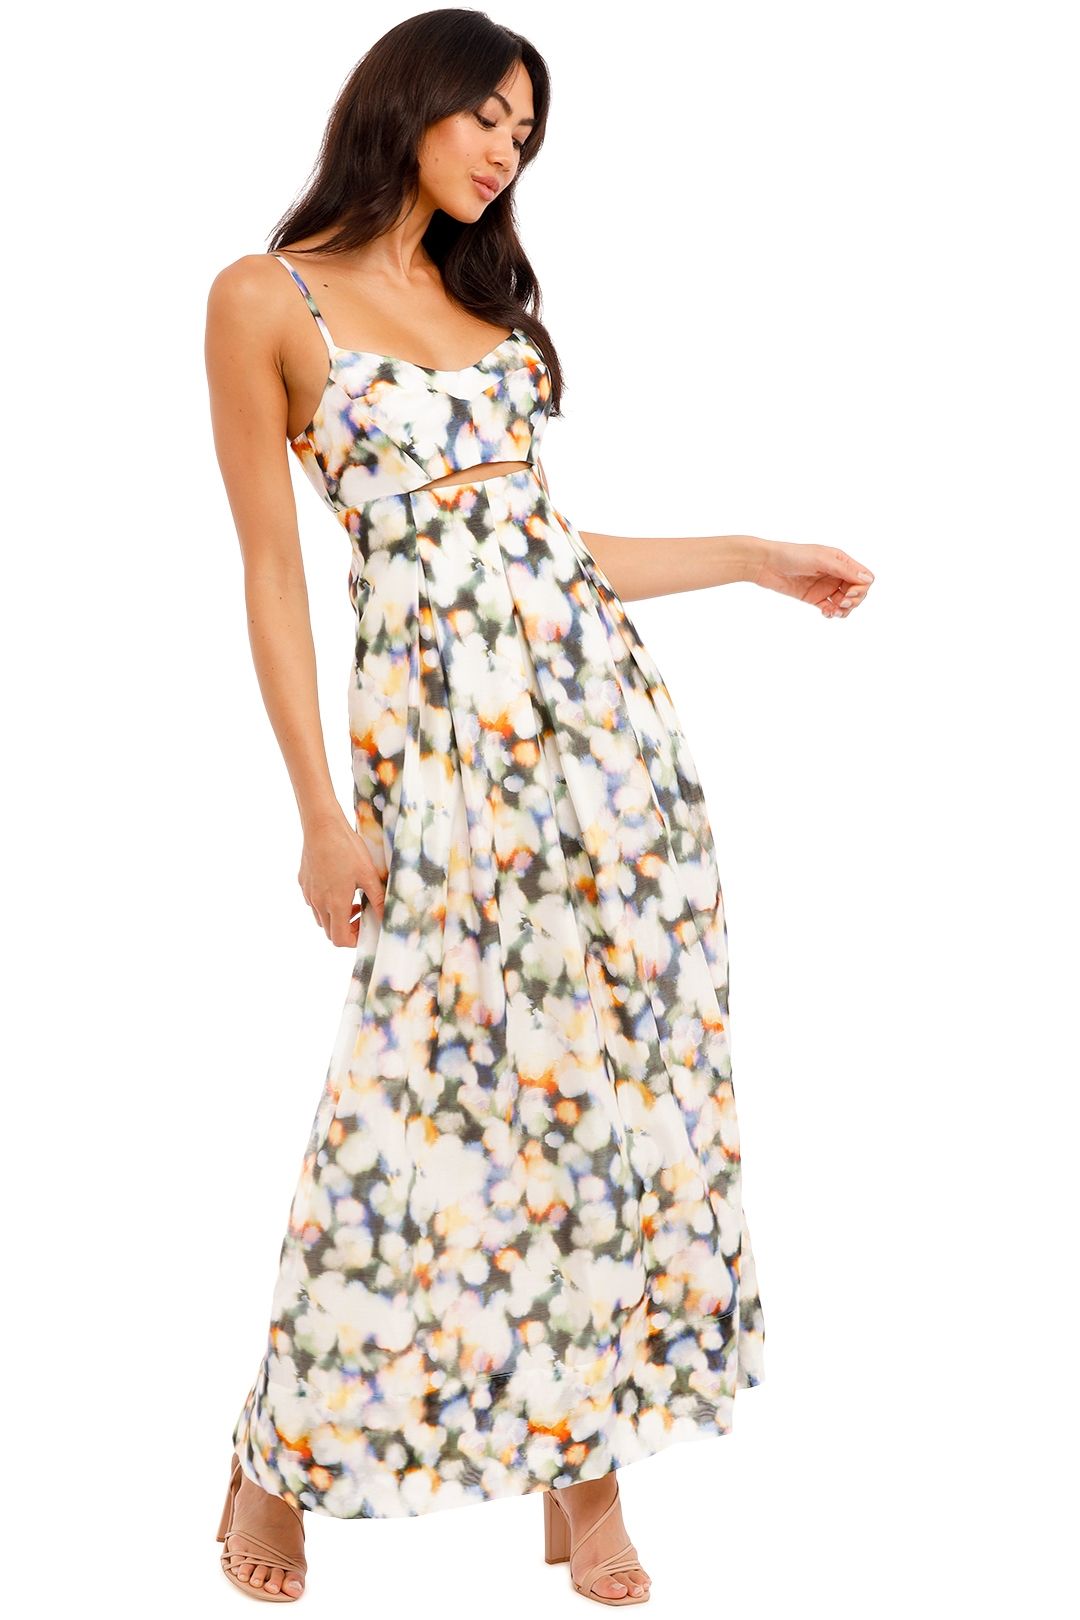 Lumiere Sundress in Lumiere Ginger and Smart maxi